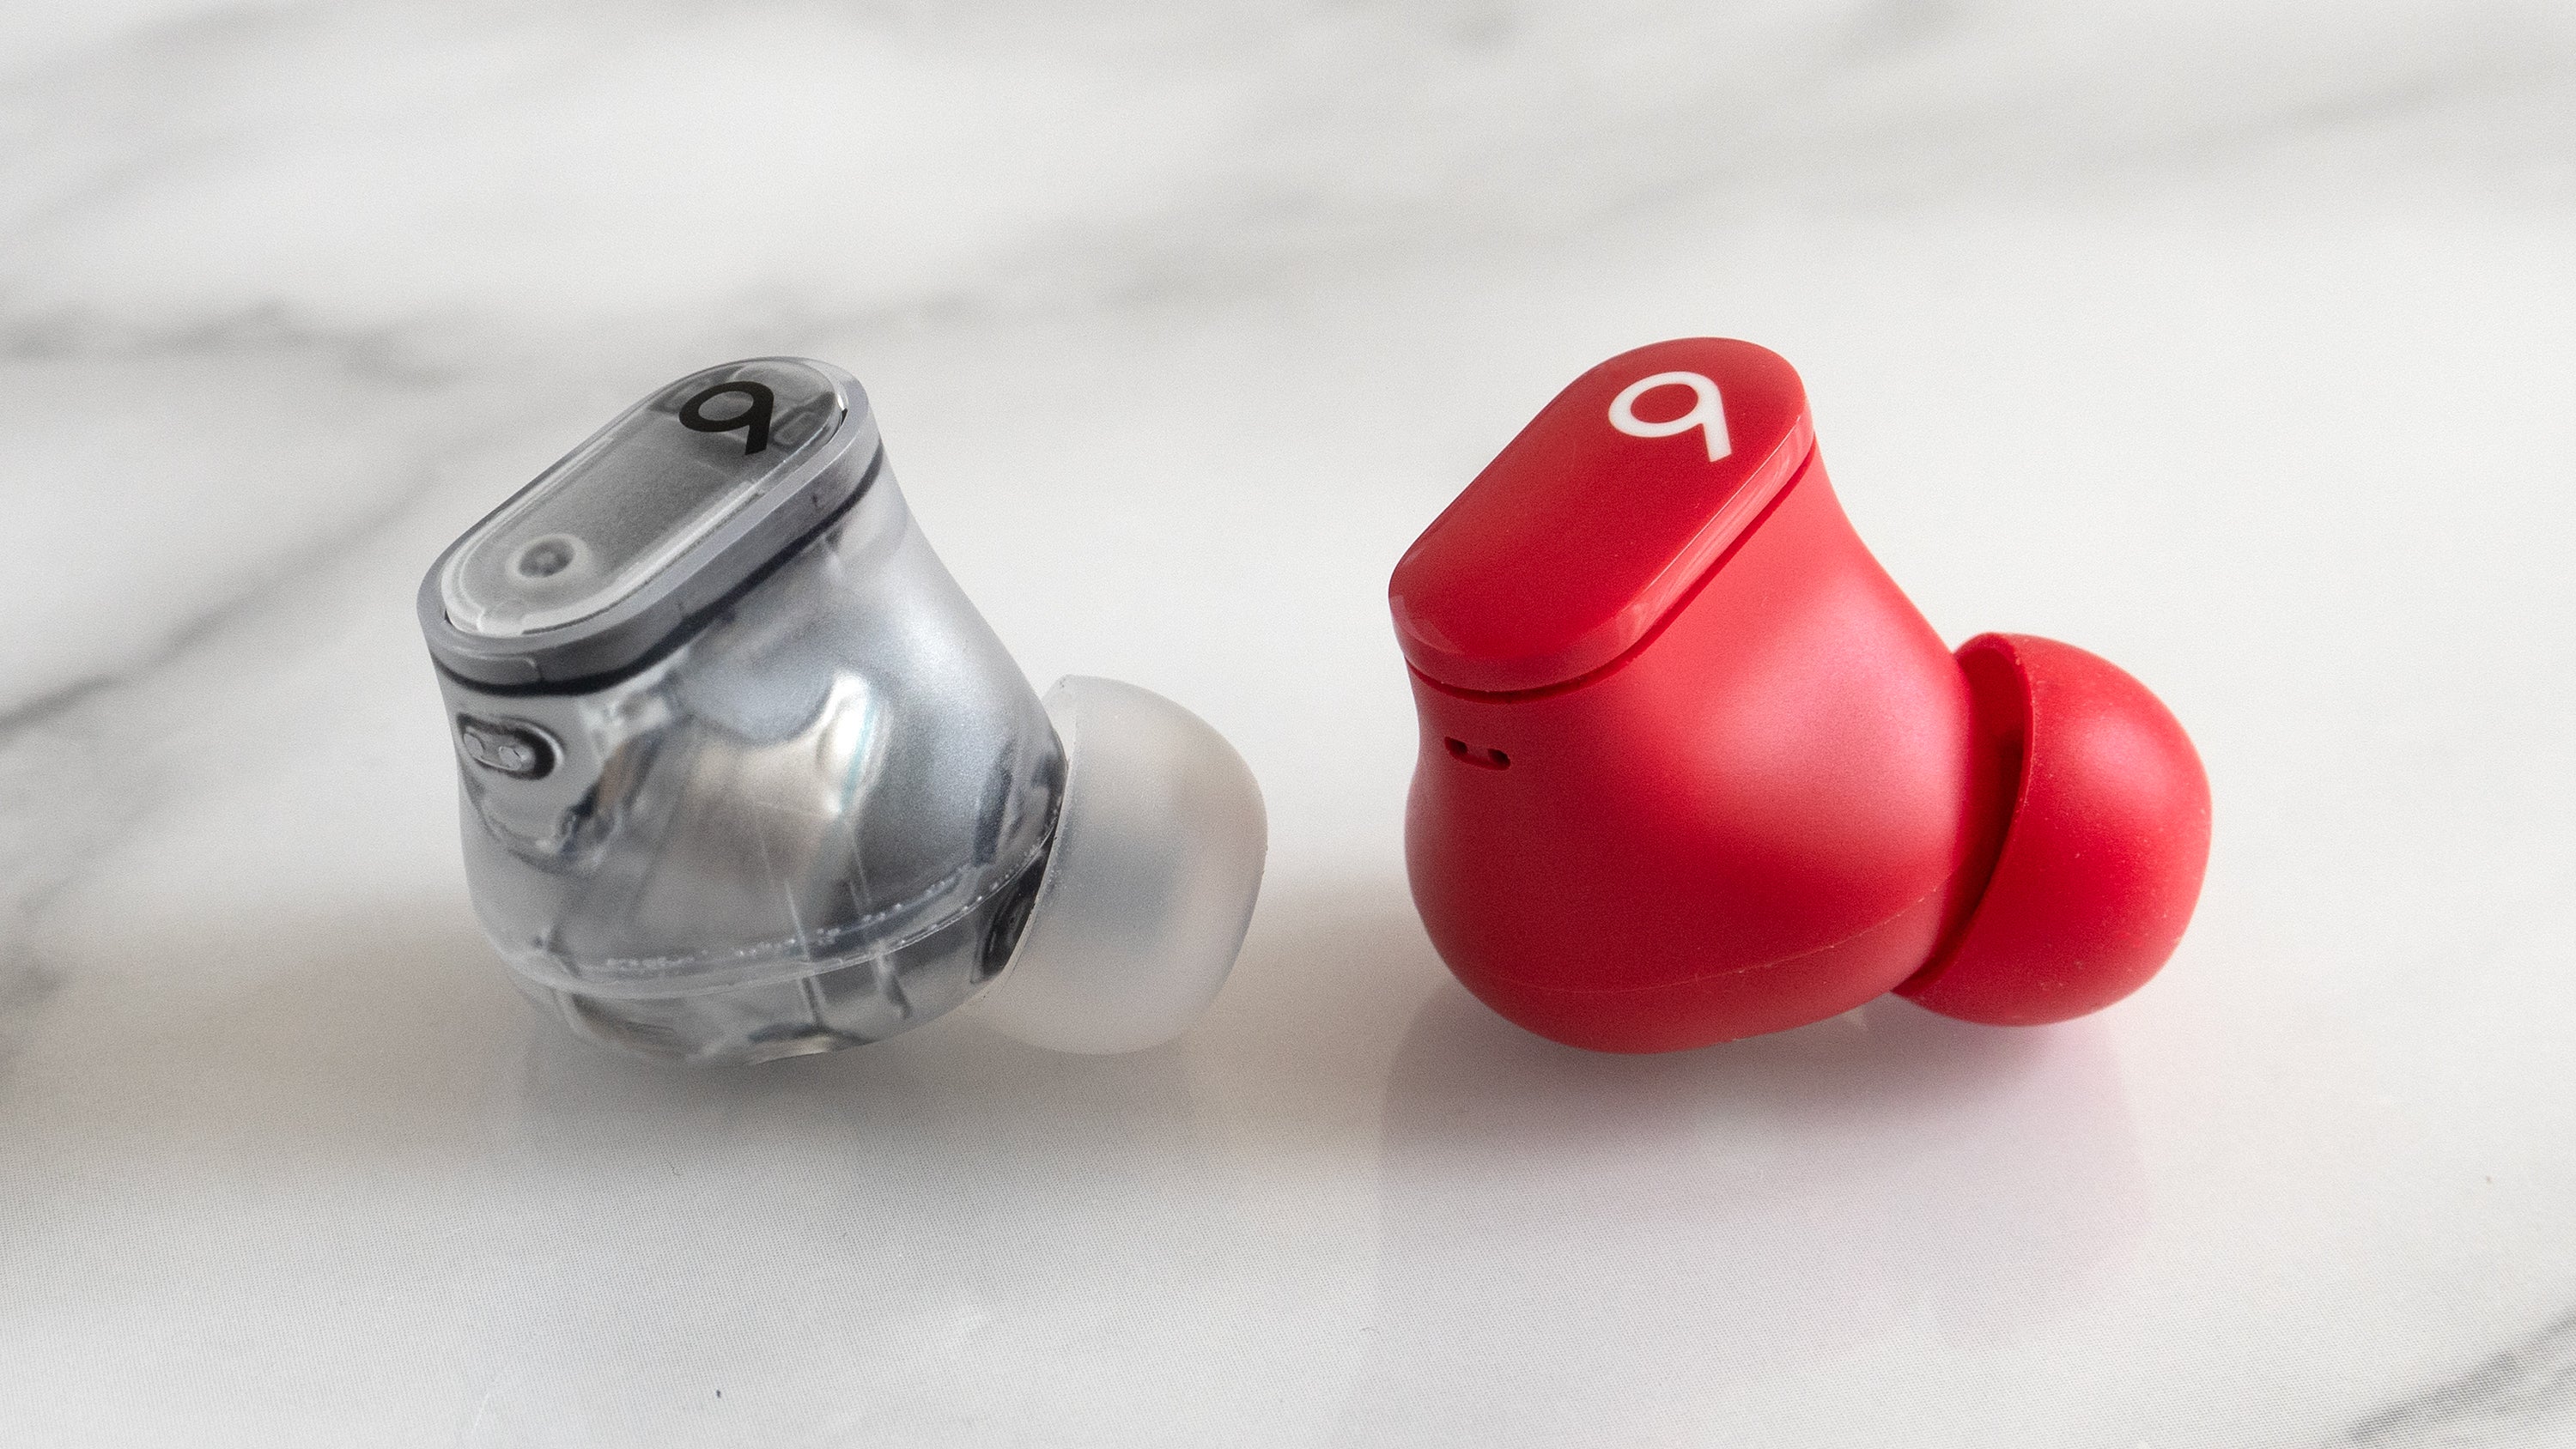 Users of the original Beats Studio Buds (right) will appreciate the upgraded design of the shortcut button on the Beats Studio Buds + (left), which is harder to accidentally press while handing the earbuds. (Photo: Andrew Liszewski | Gizmodo)